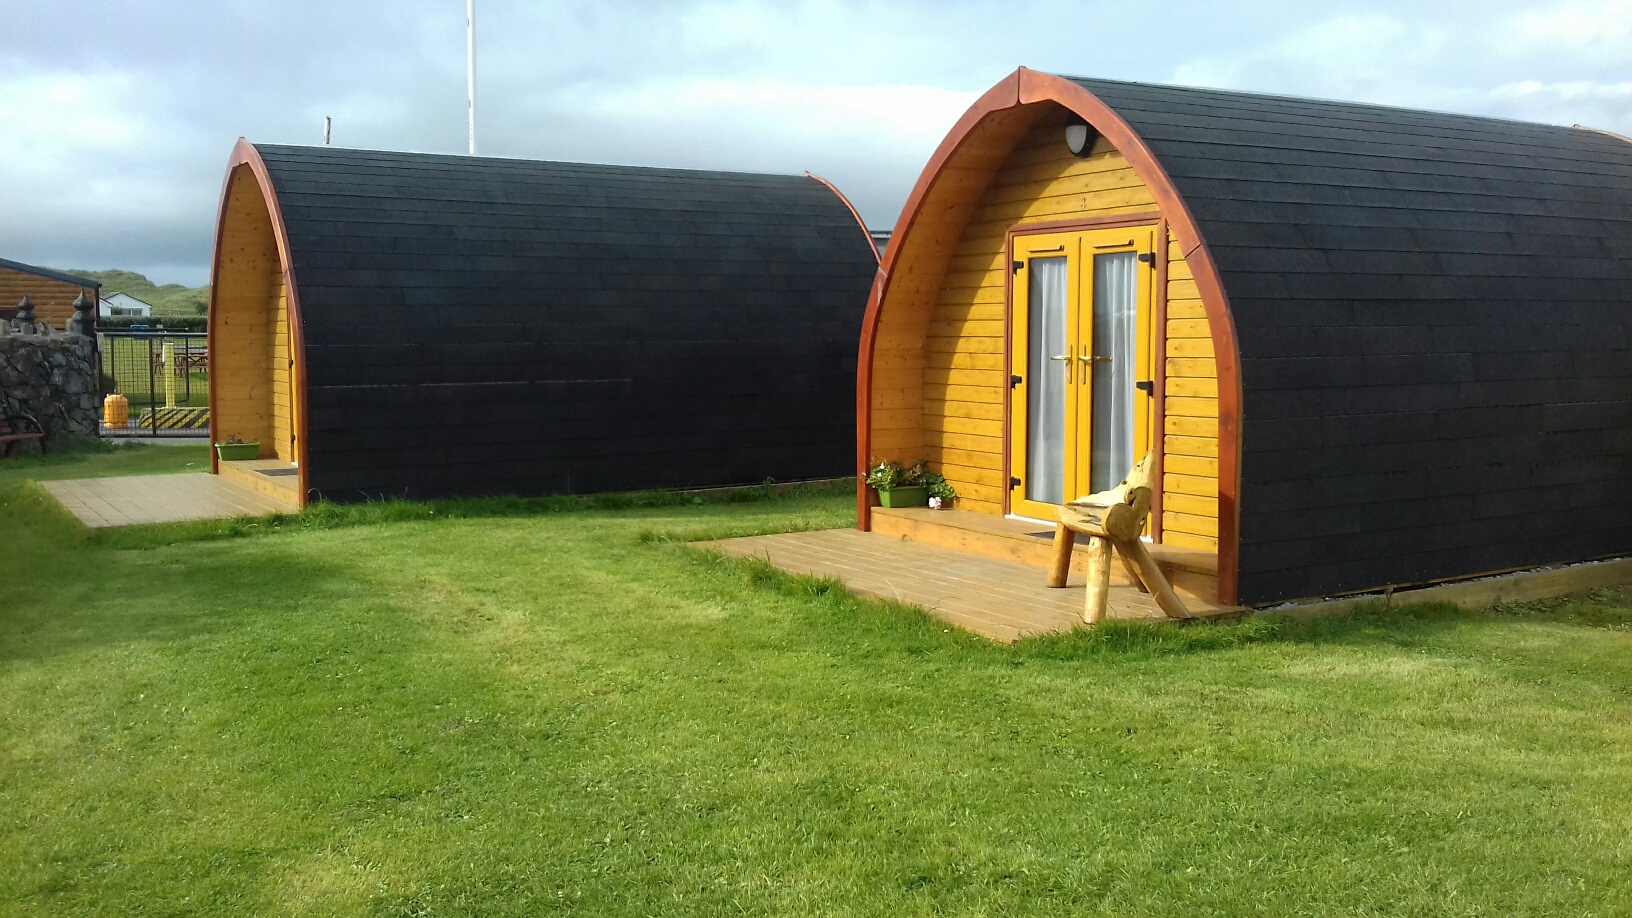 The Glamping Pod